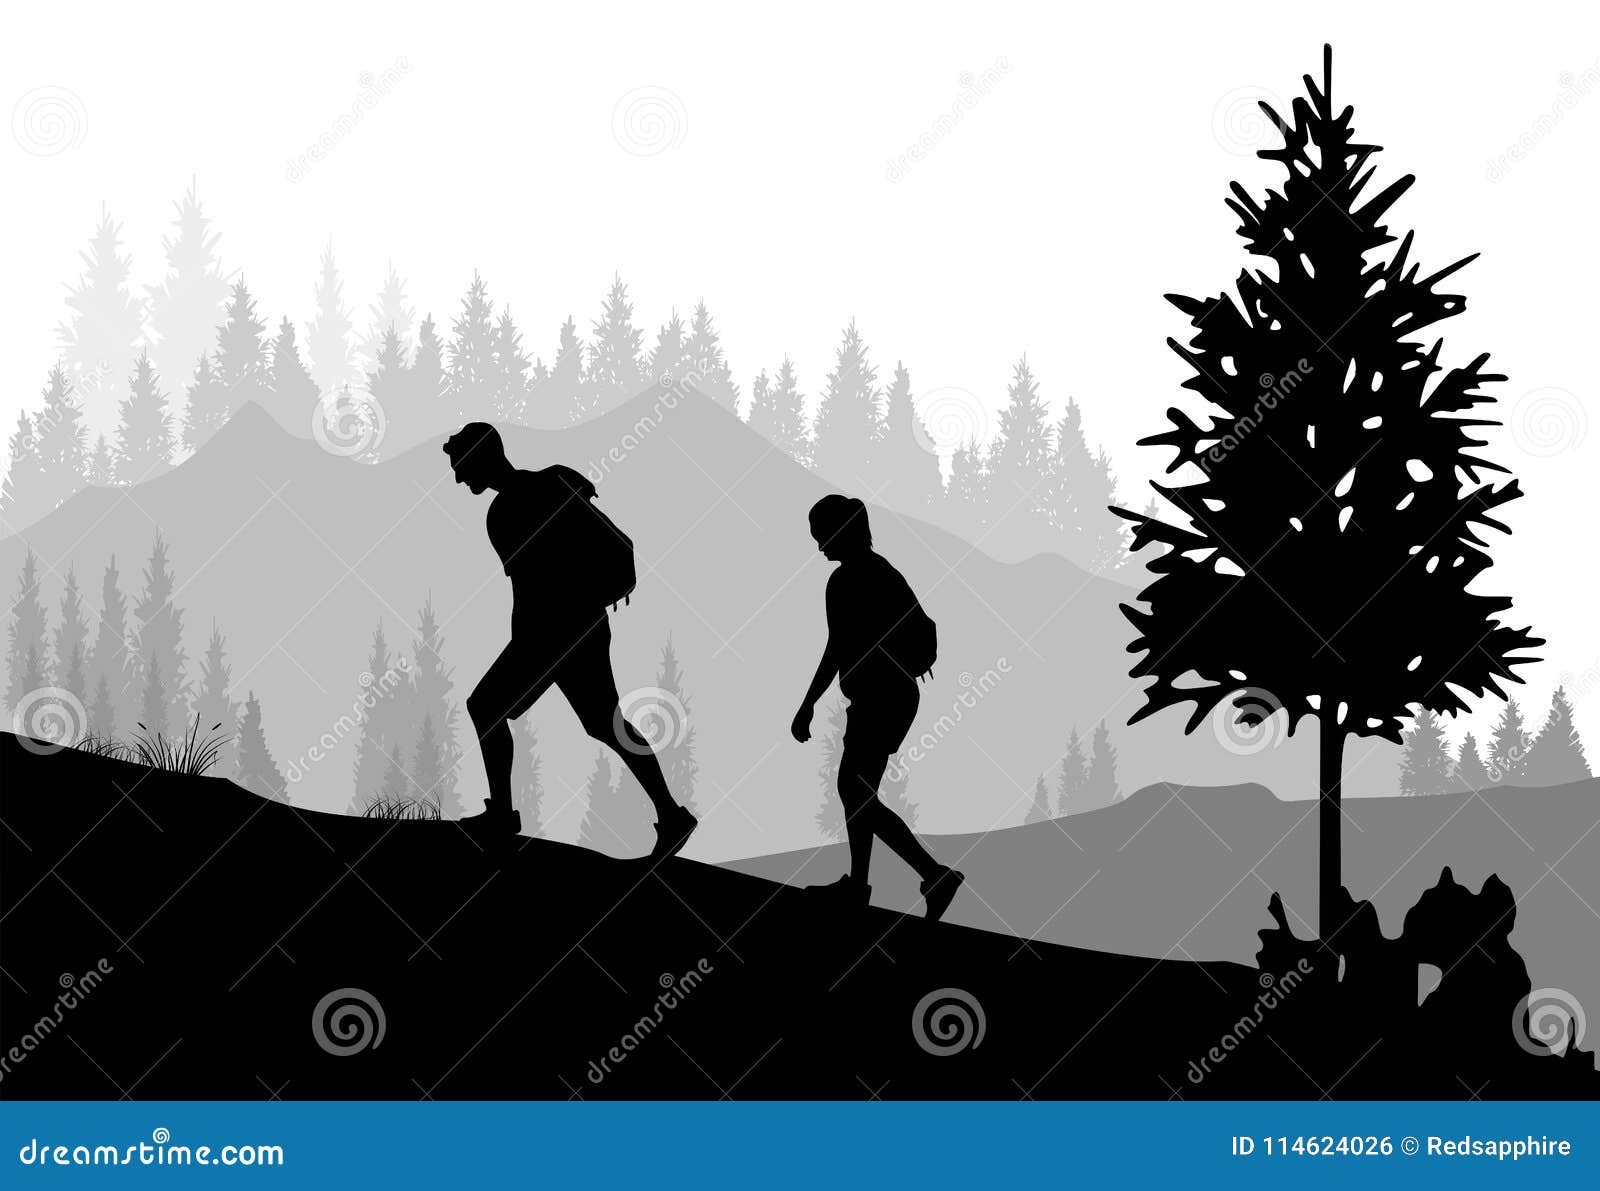 mountaineering. silhouettes of people climbing and hiking on forest background